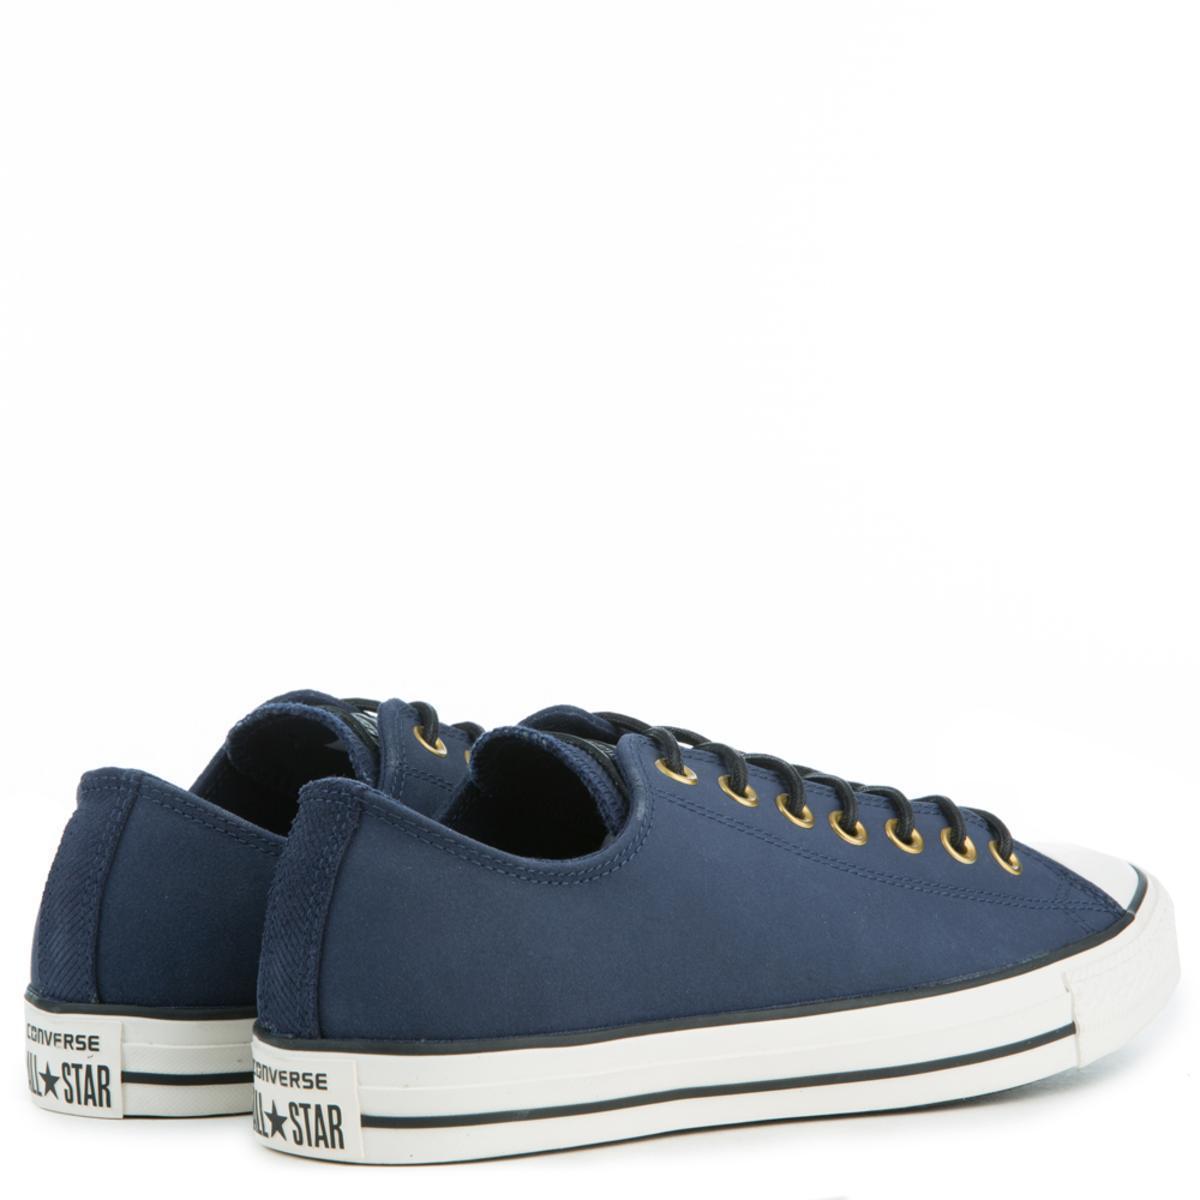 converse low tops navy blue